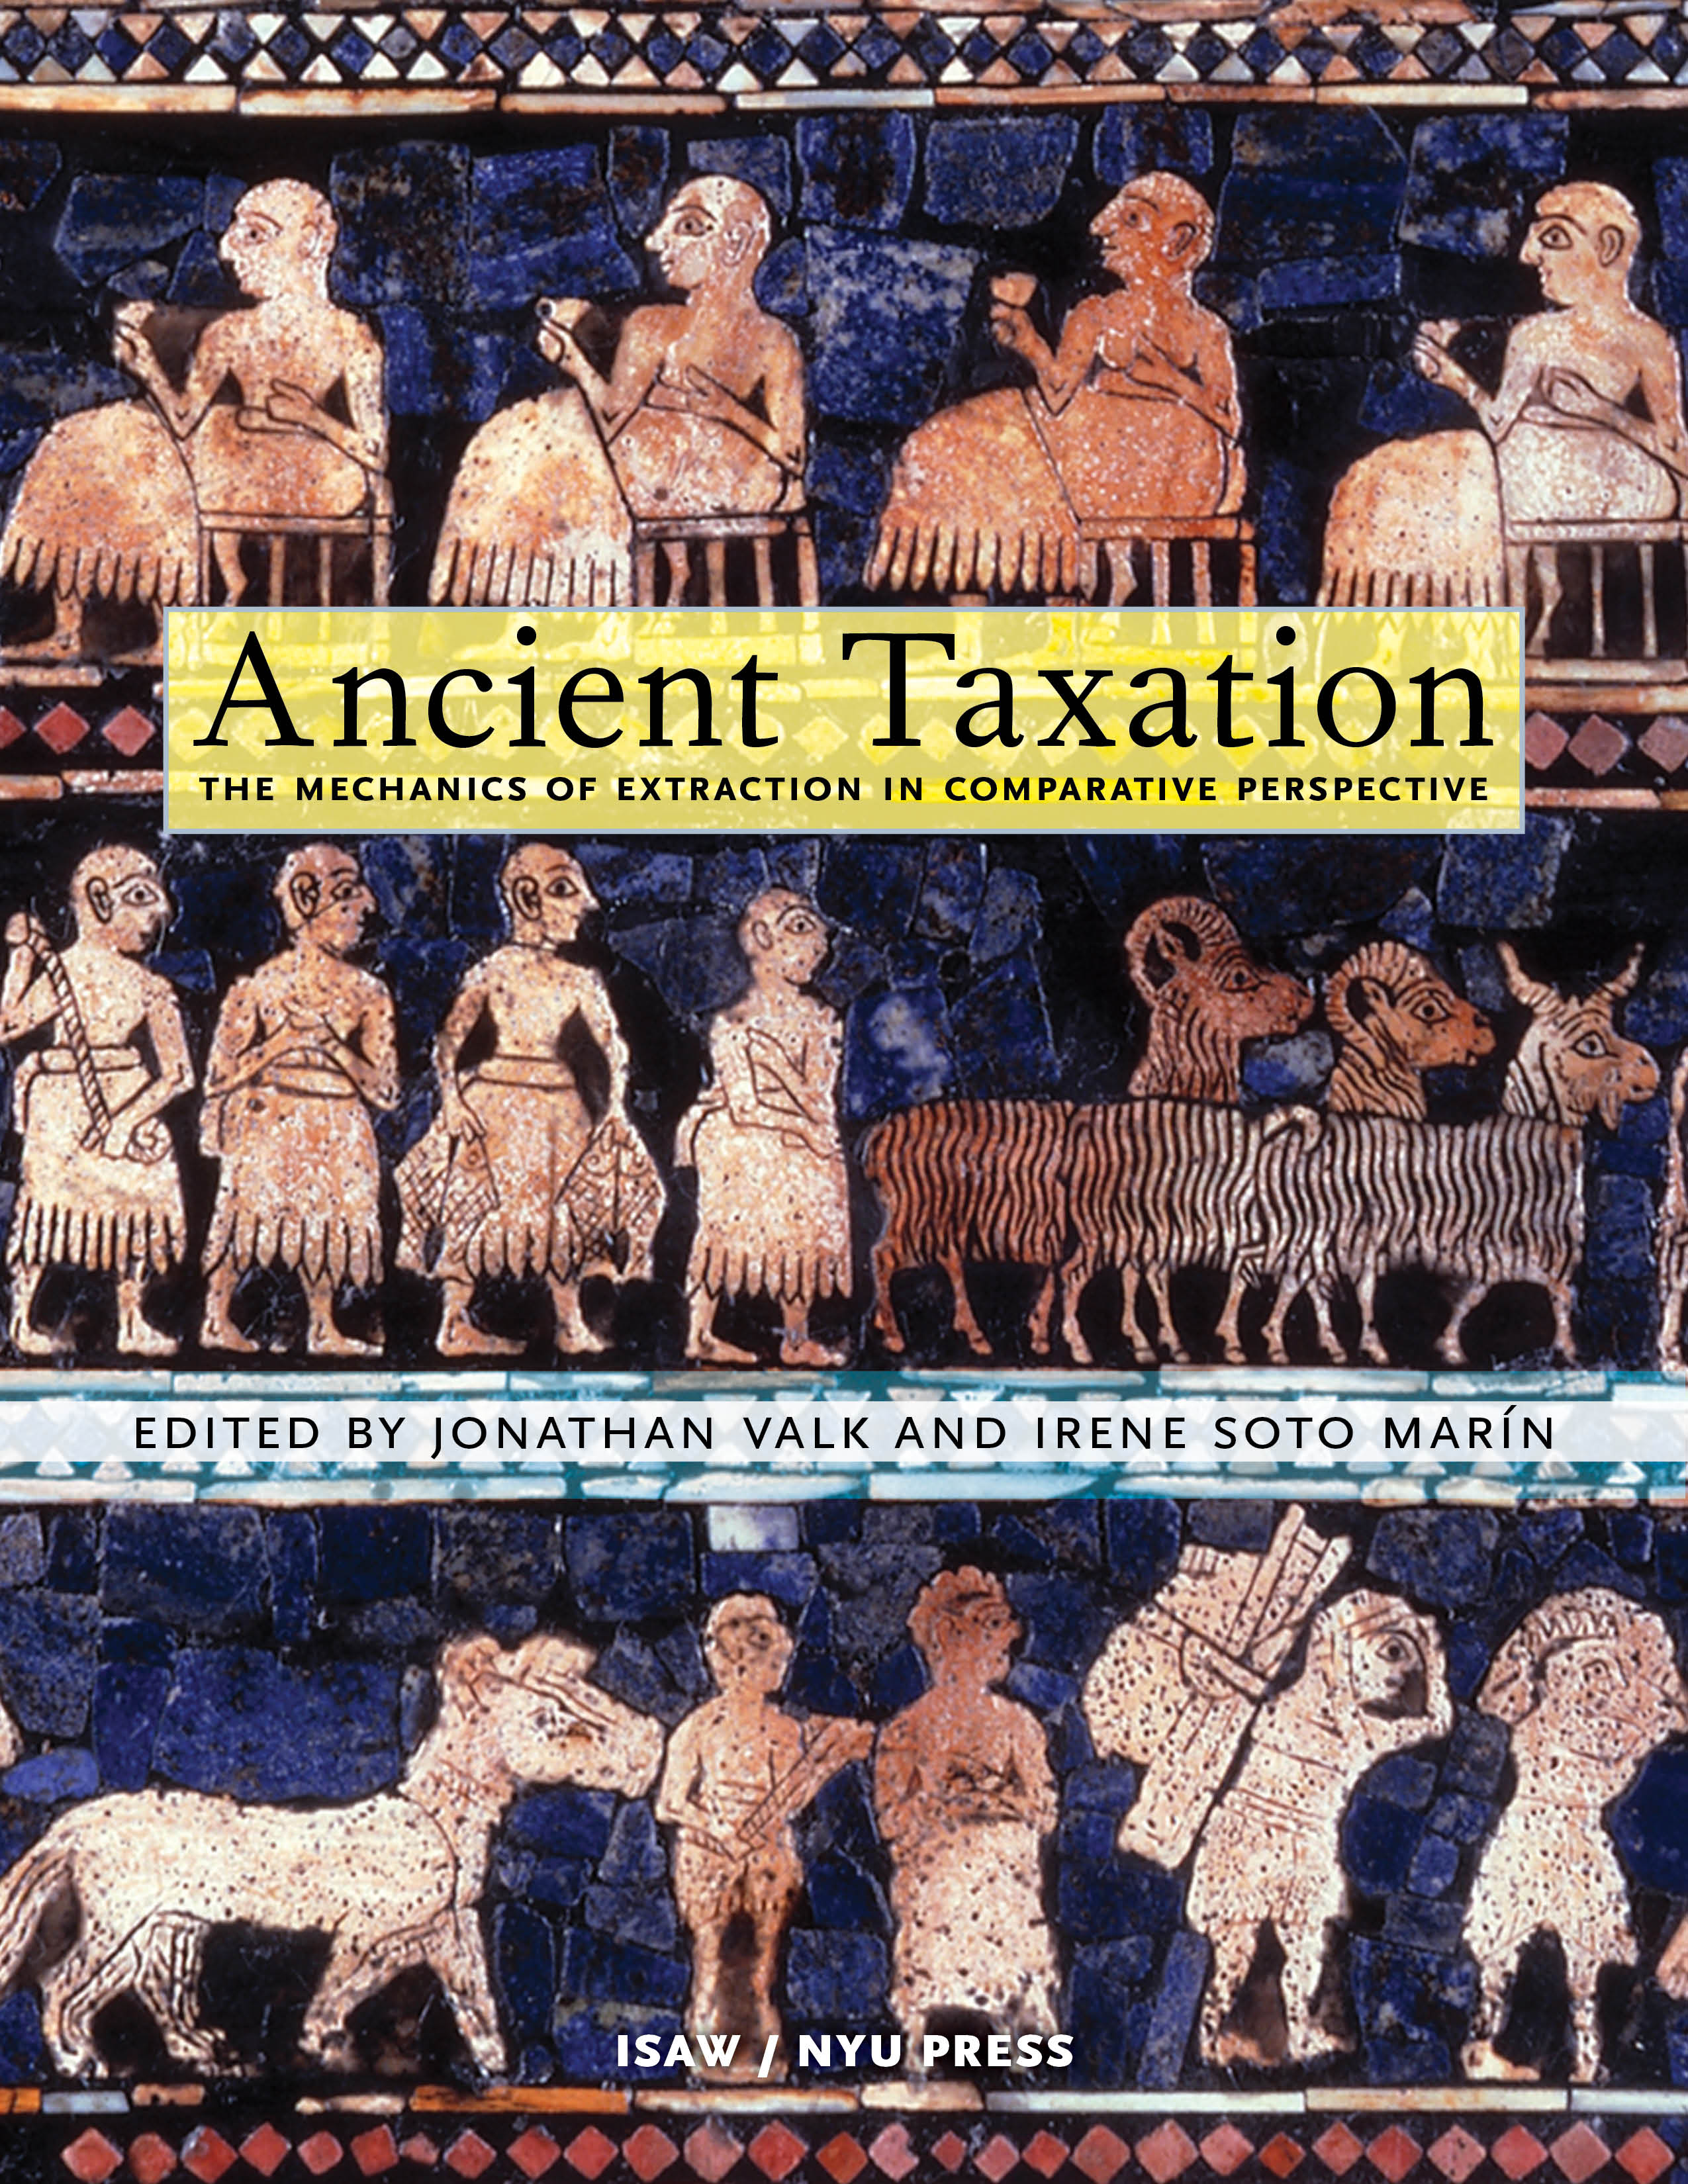 ISAW announces the publication of Ancient Taxation: The Mechanics of Extraction in Comparative Perspective